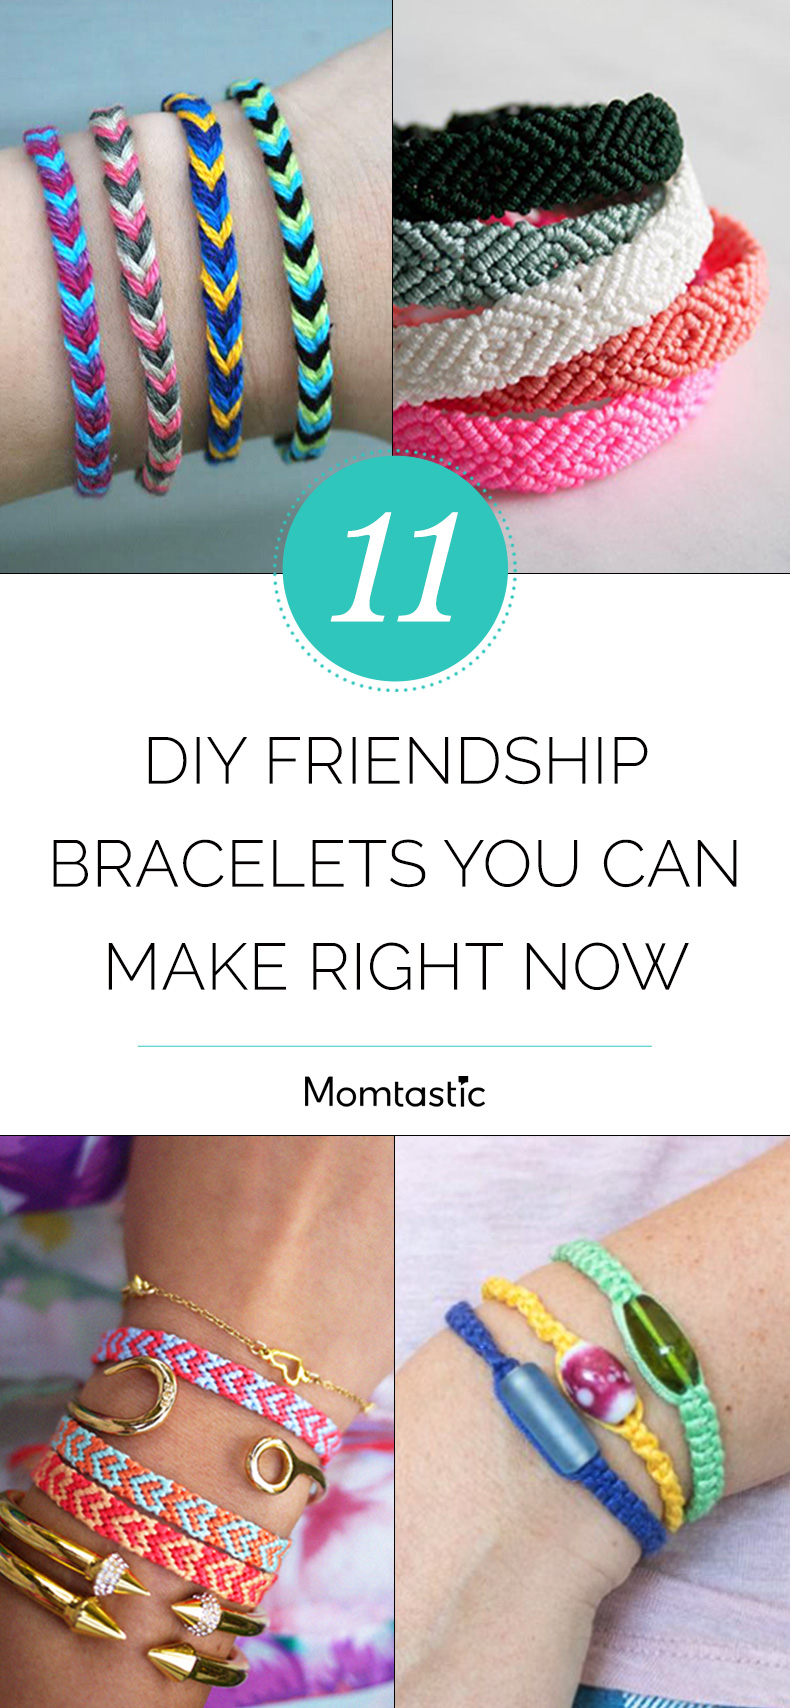 11 DIY Friendship Bracelets You Can Make Right Now